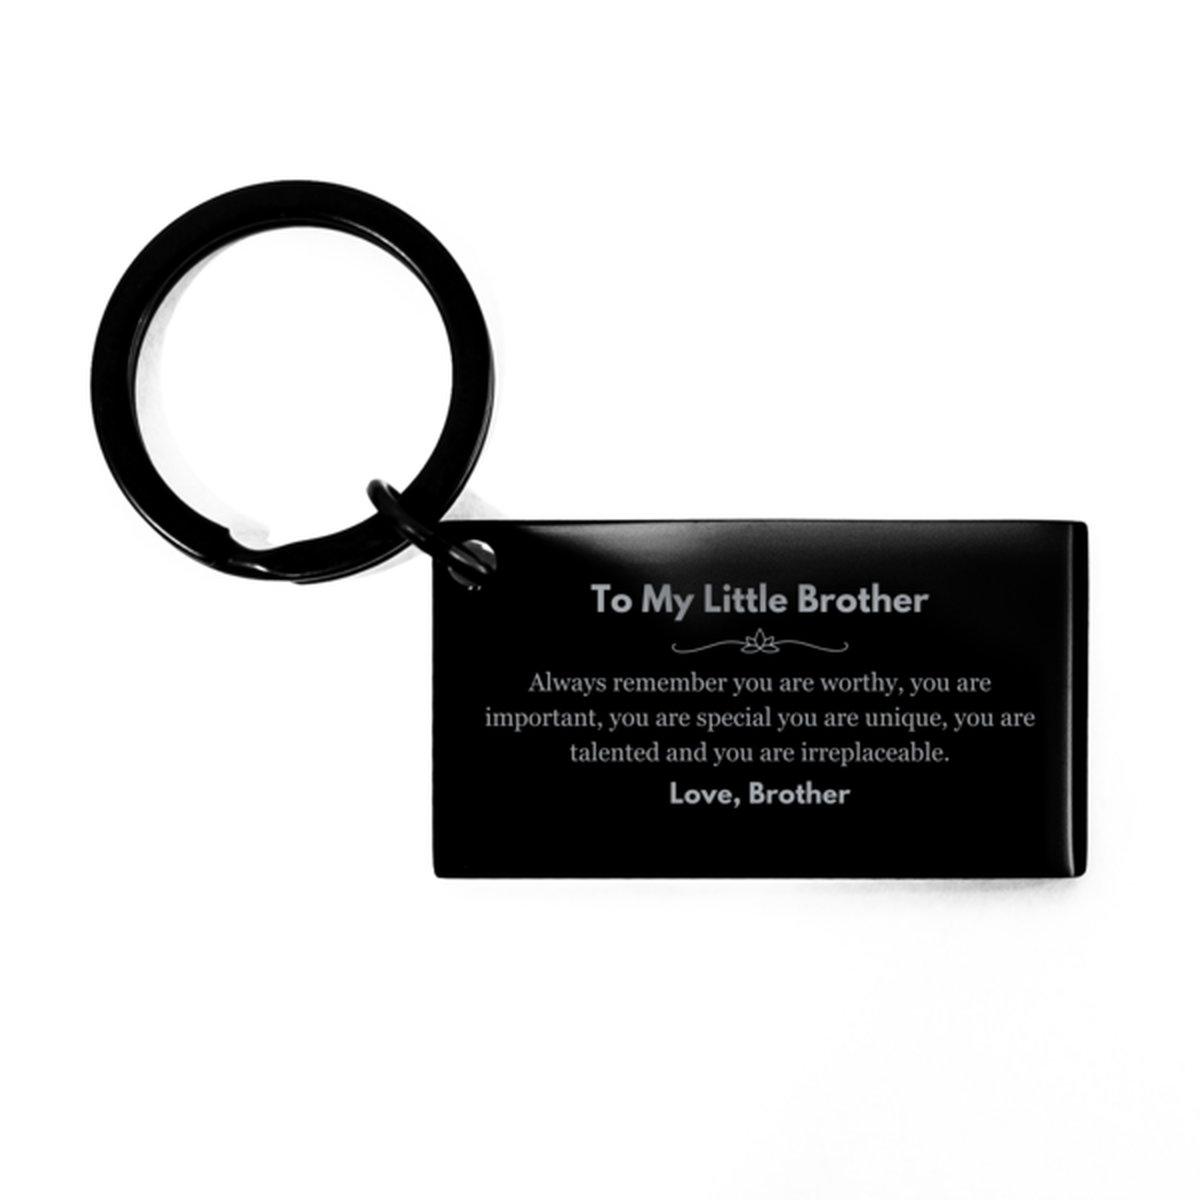 Little Brother Birthday Gifts from Brother, Inspirational Keychain for Little Brother Christmas Graduation Gifts for Little Brother Always remember you are worthy, you are important. Love, Brother